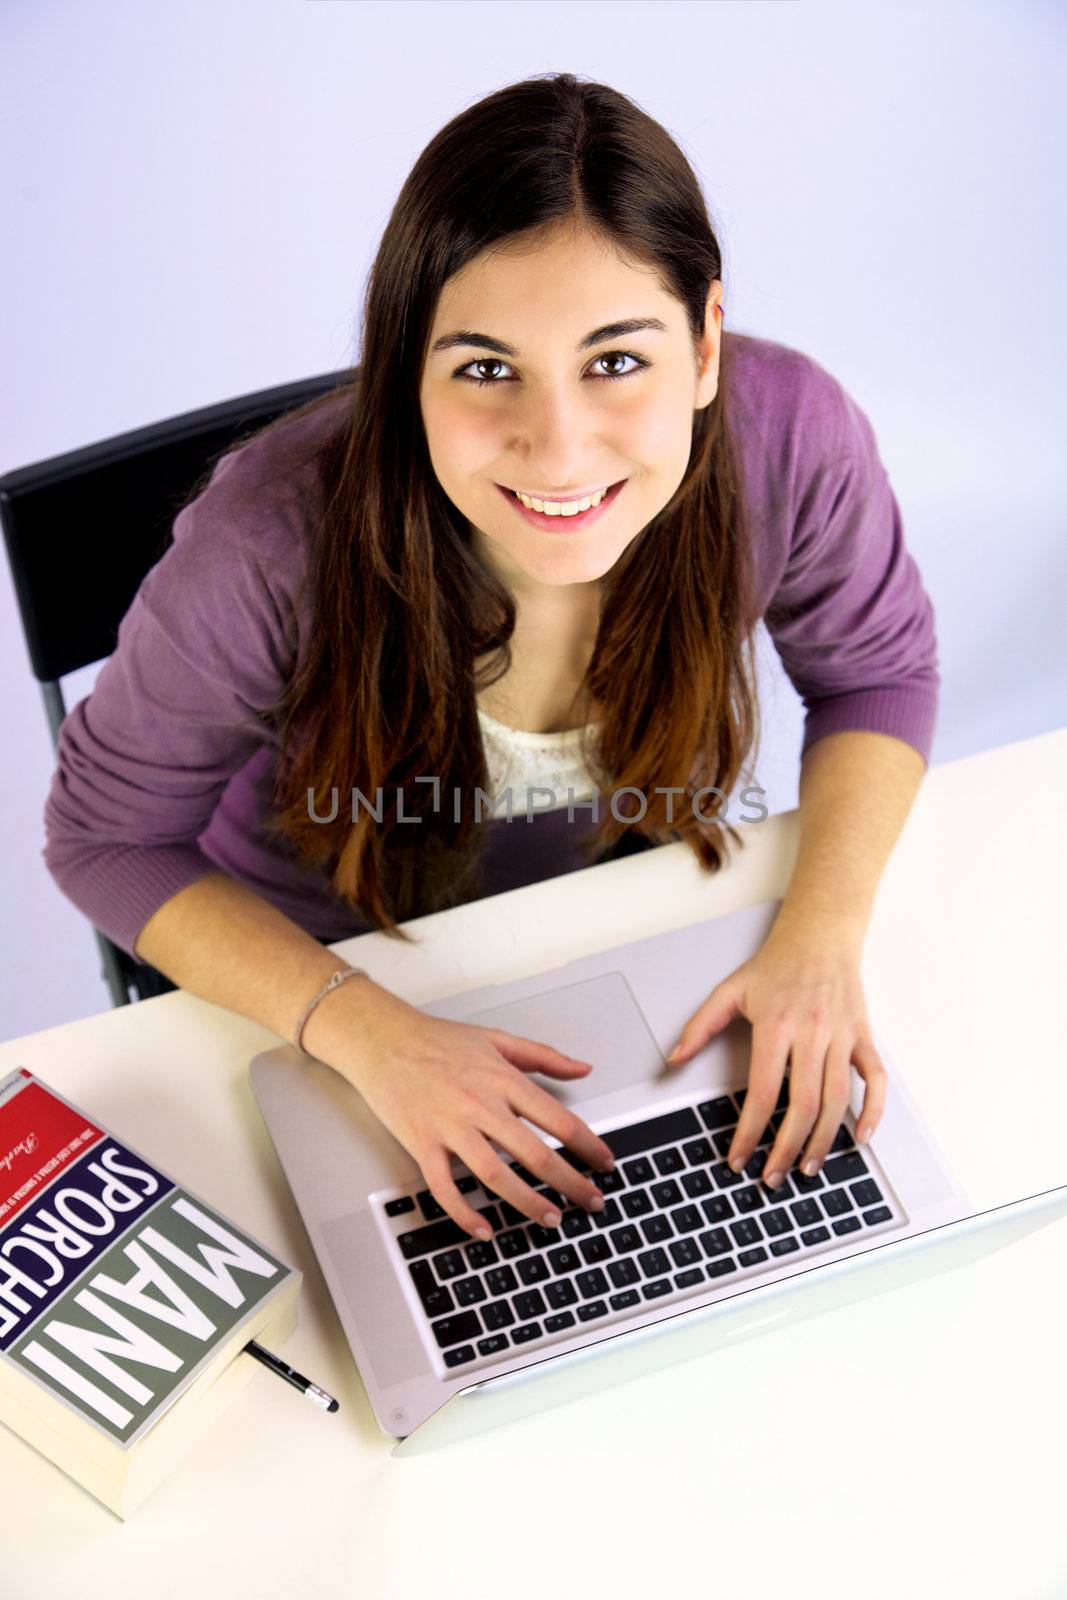 Cute young woman with long hair studying with computer 